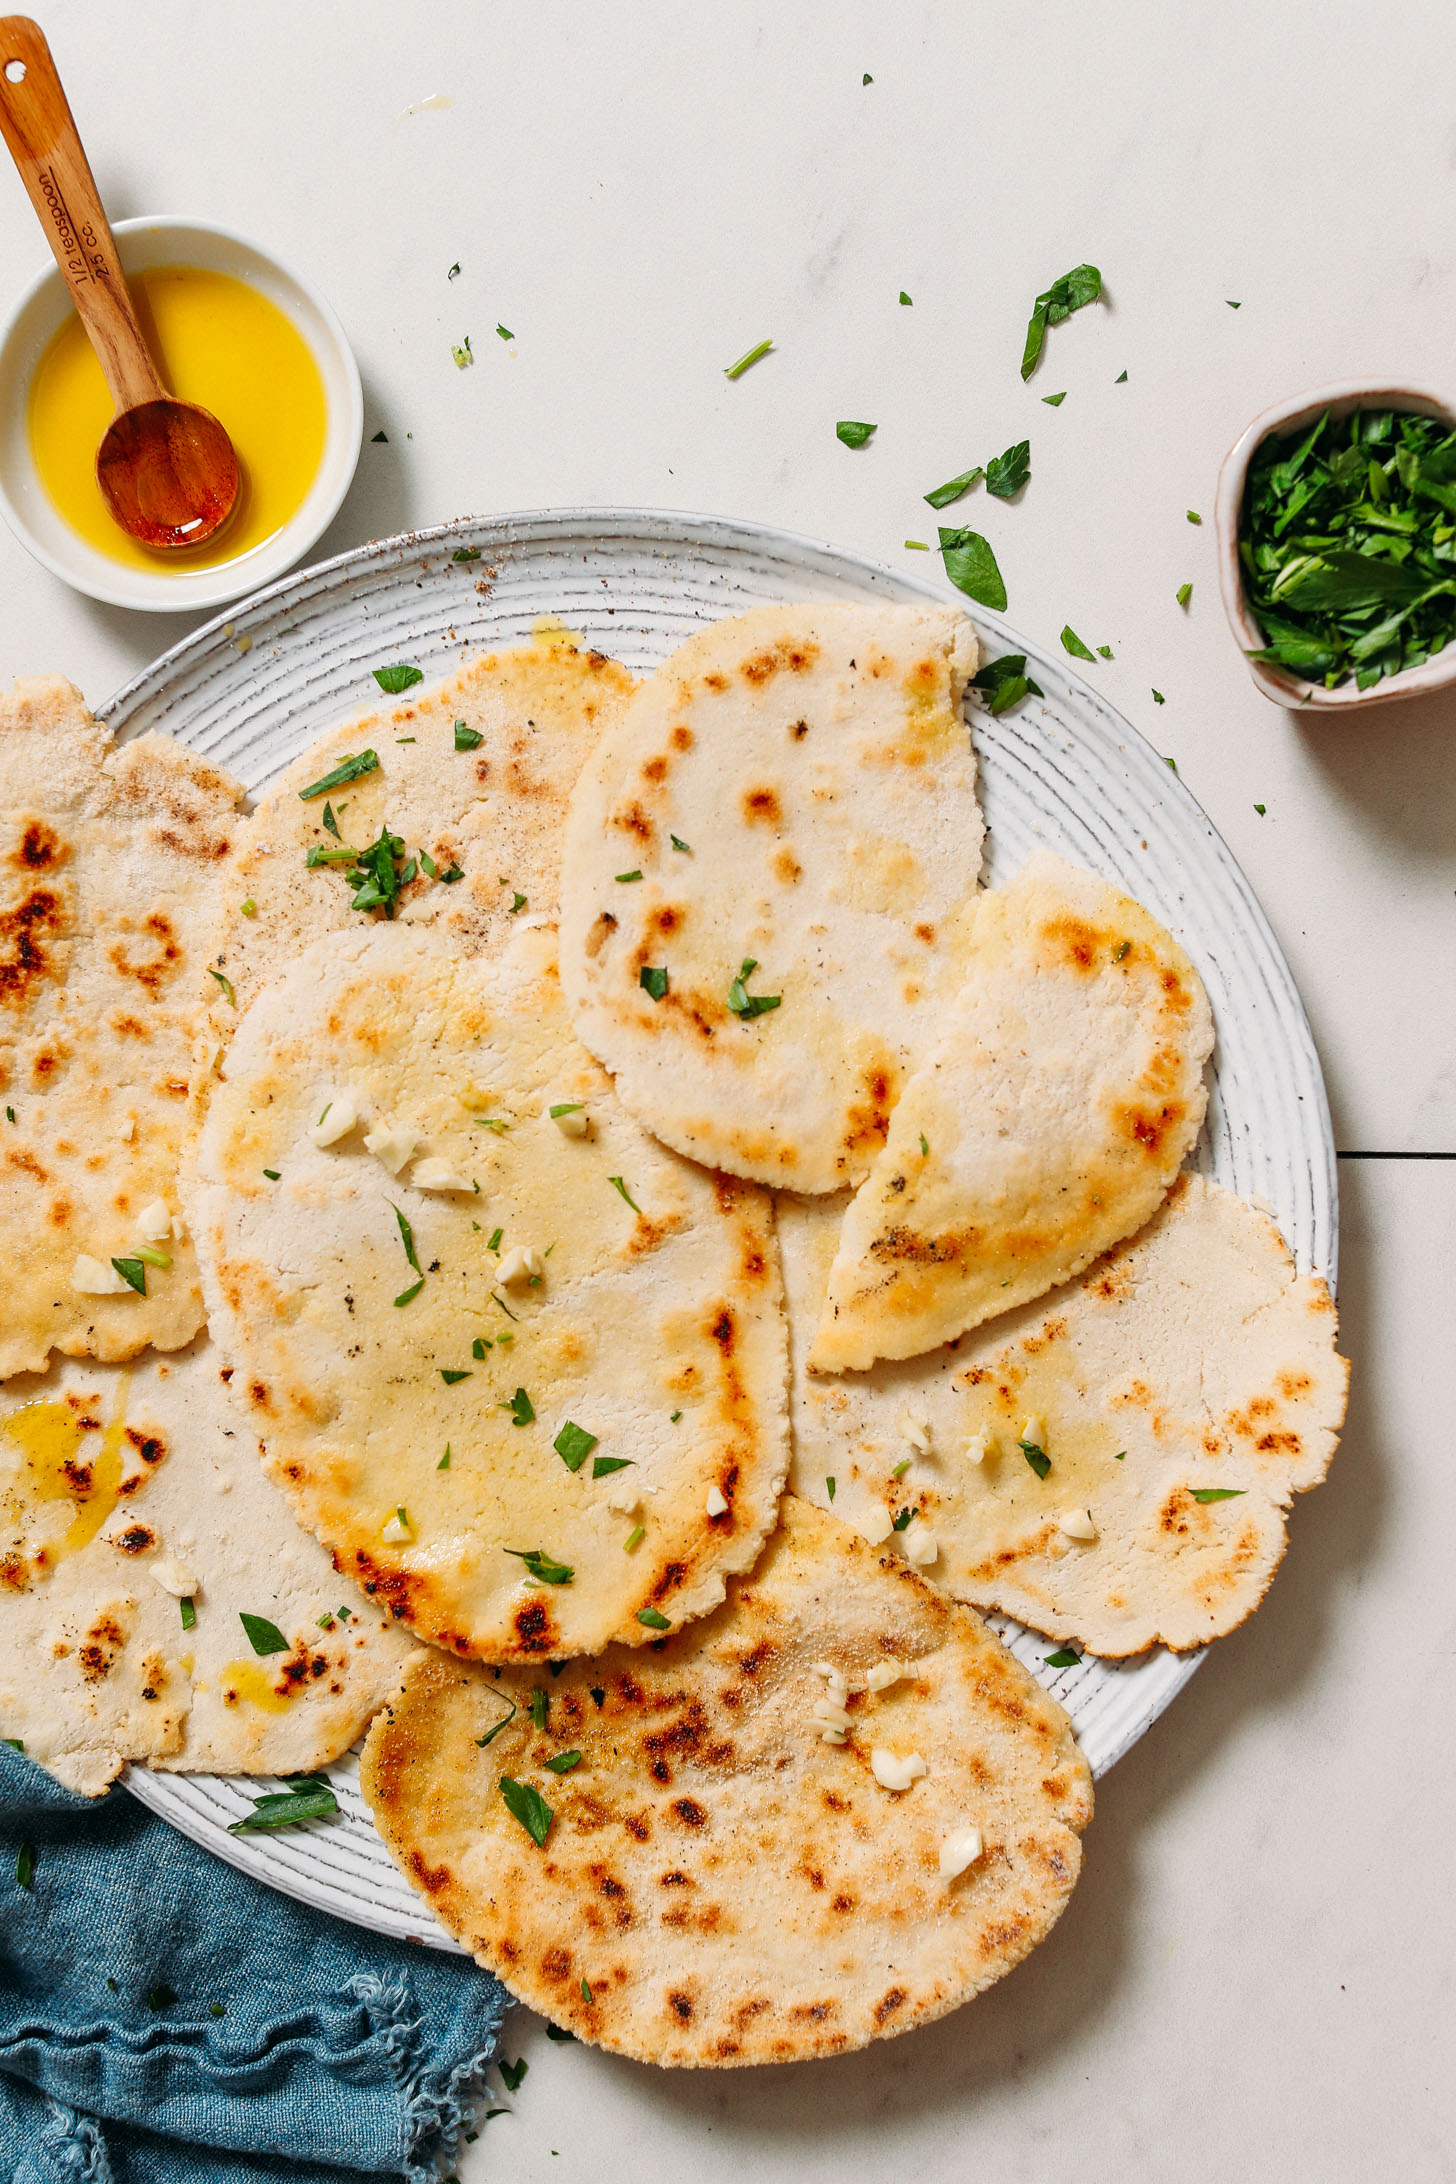 Bowls of olive oil and parsley next to a platter of vegan gluten free naan